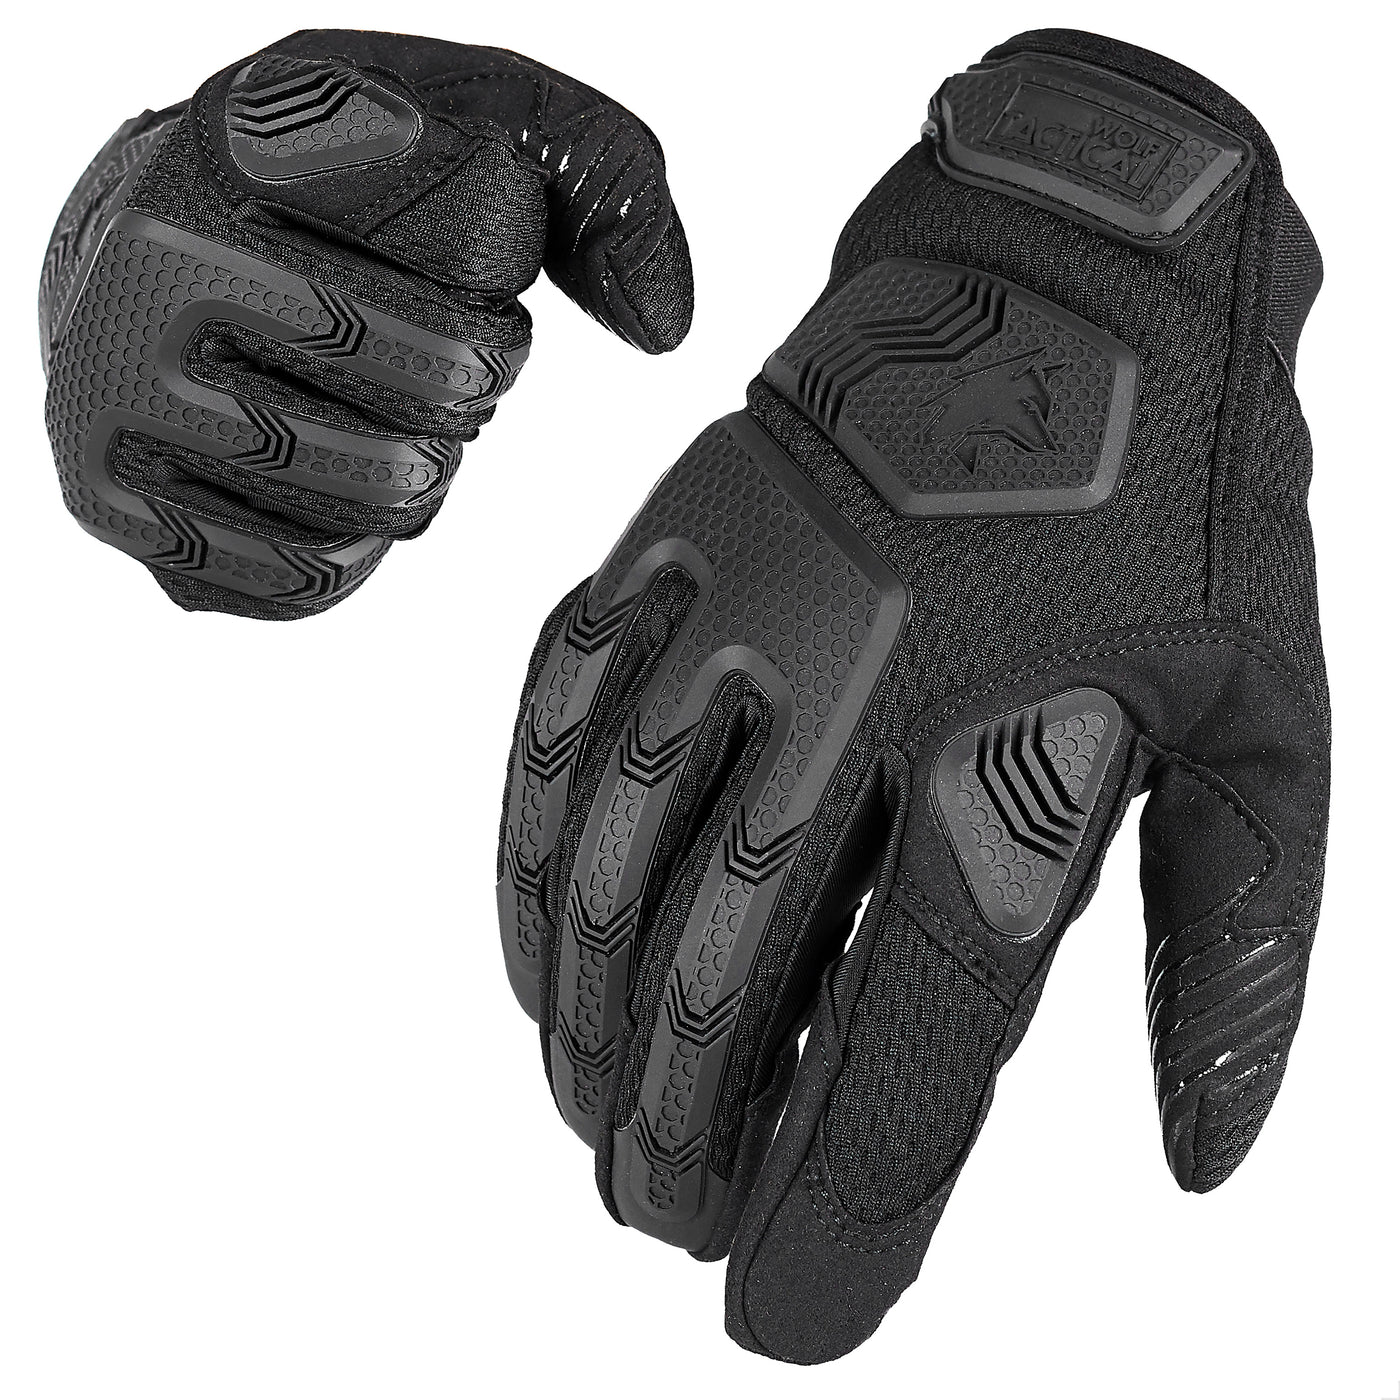 Tactical Shooting Gloves – Wolf Tactical